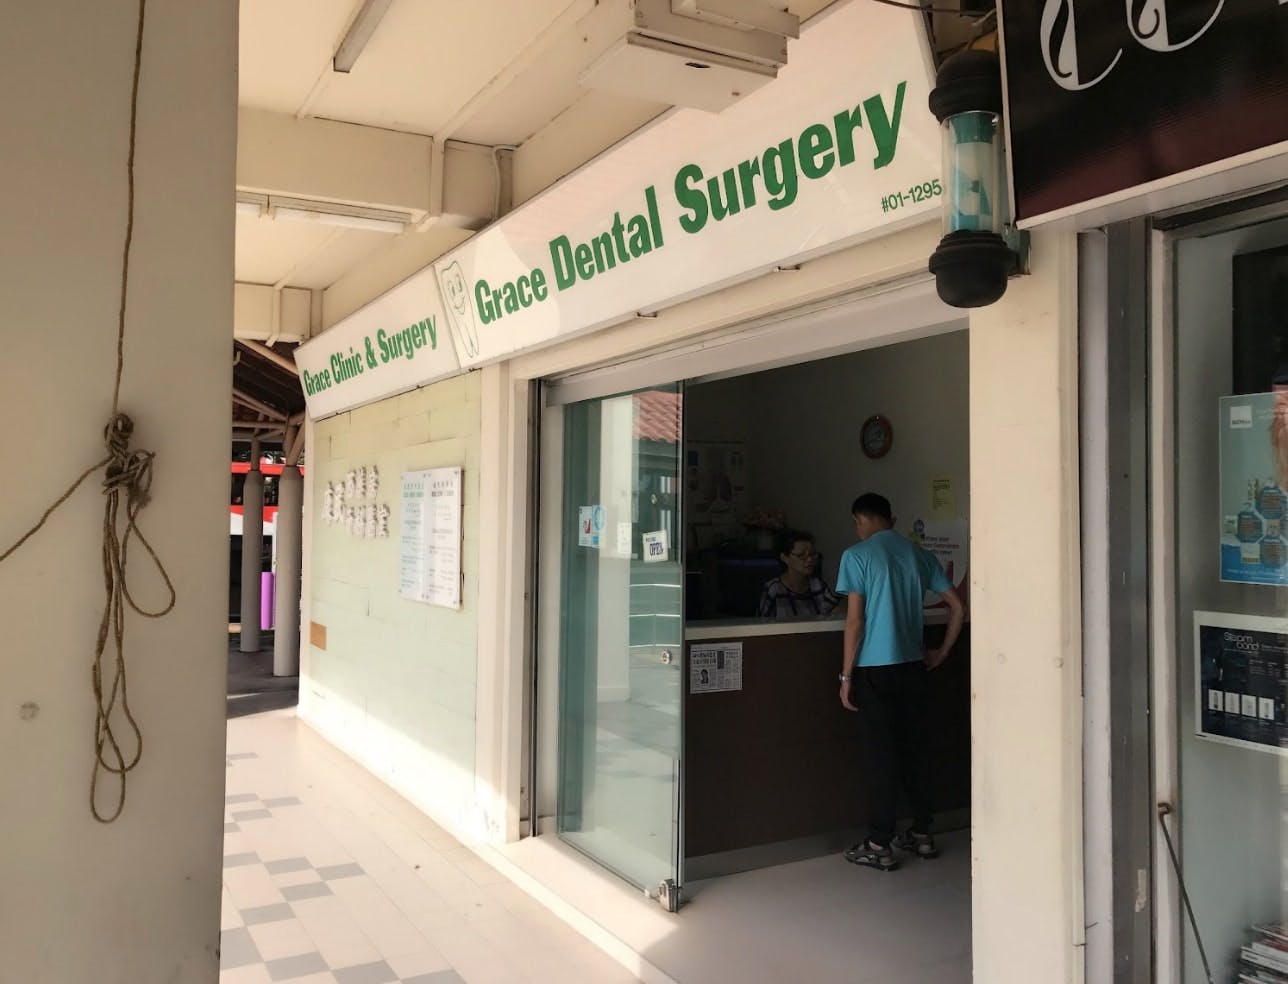 Grace Clinic and Surgery